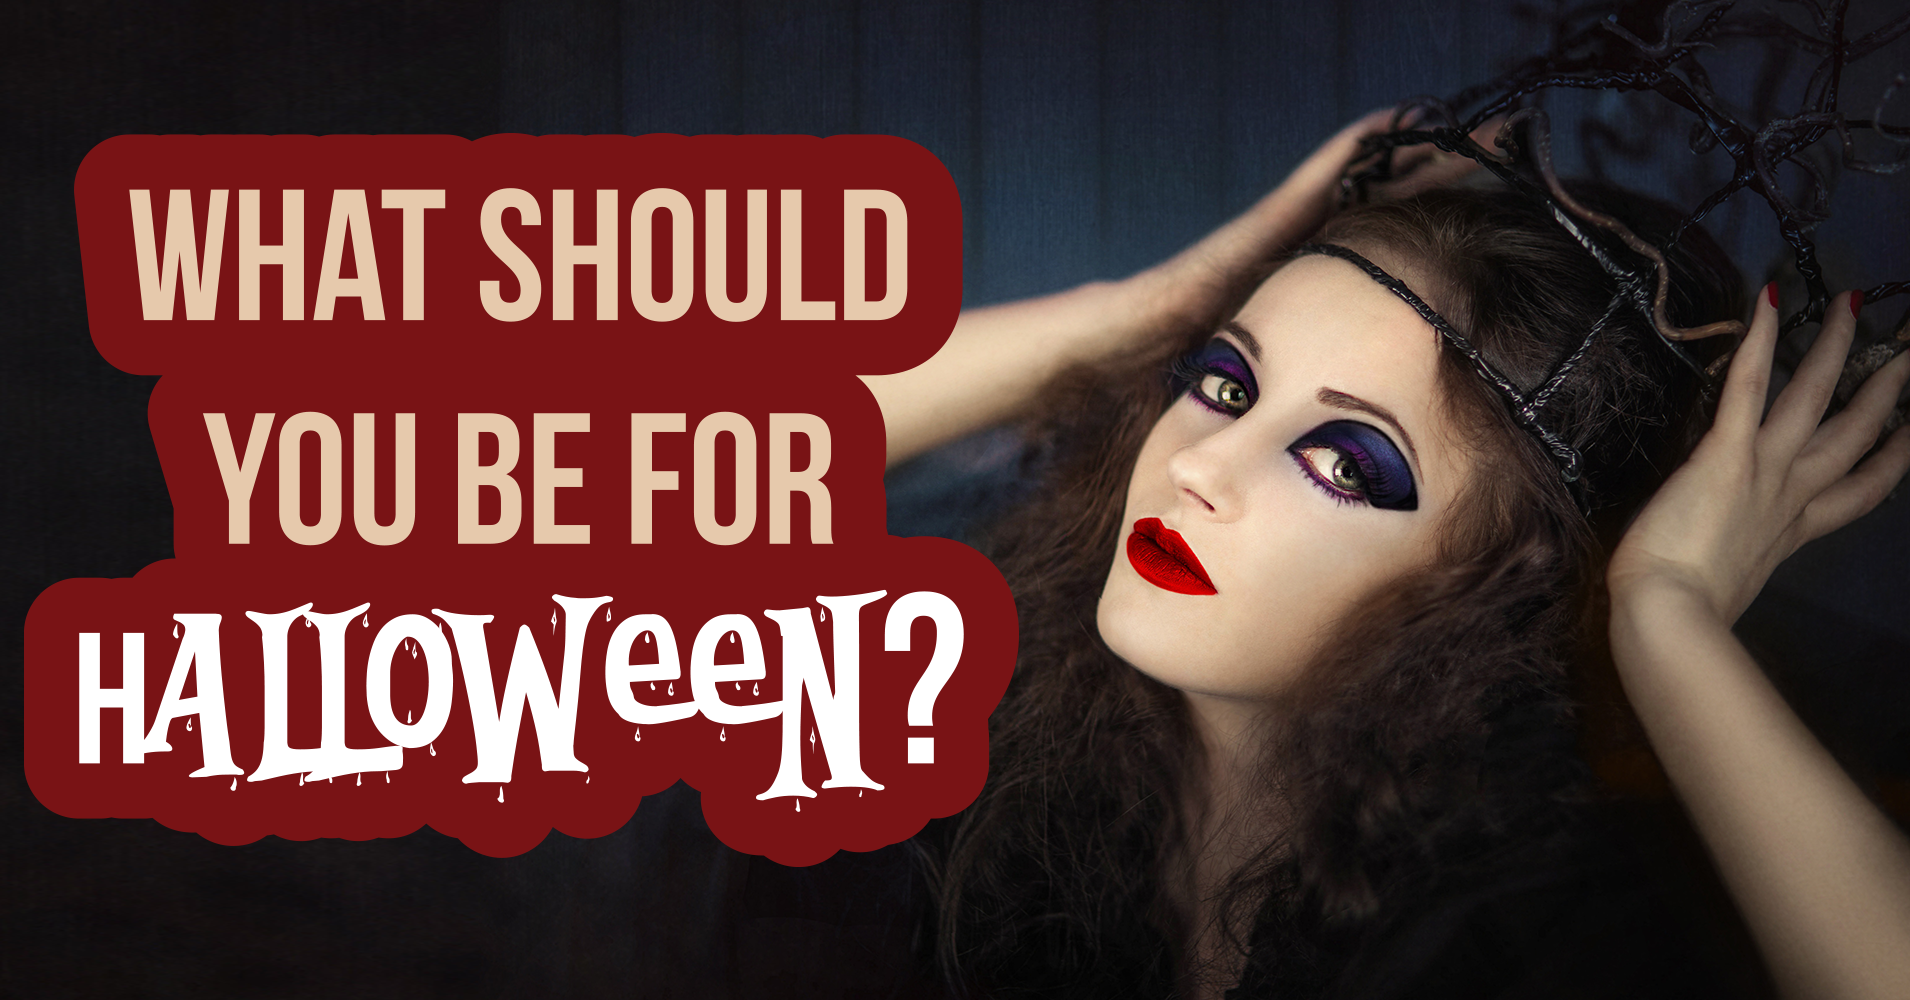 What Should You Be For Halloween? - Quiz - Quizony.com